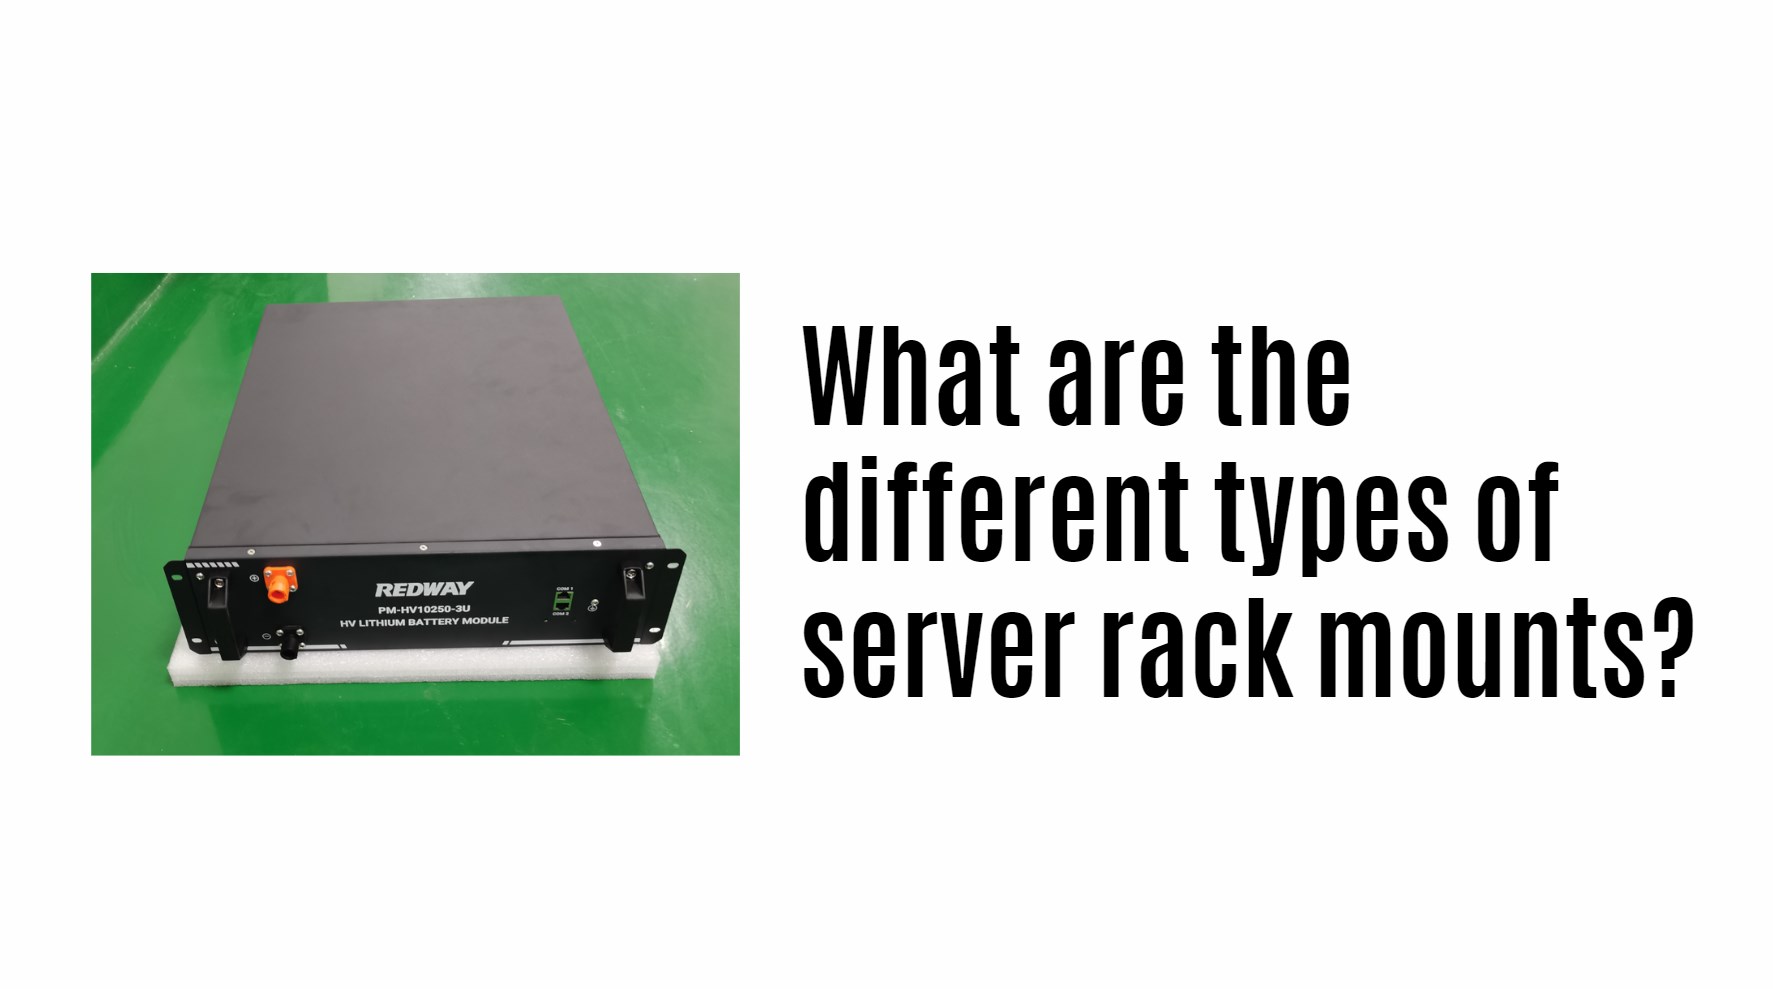 What are the different types of server rack mounts?